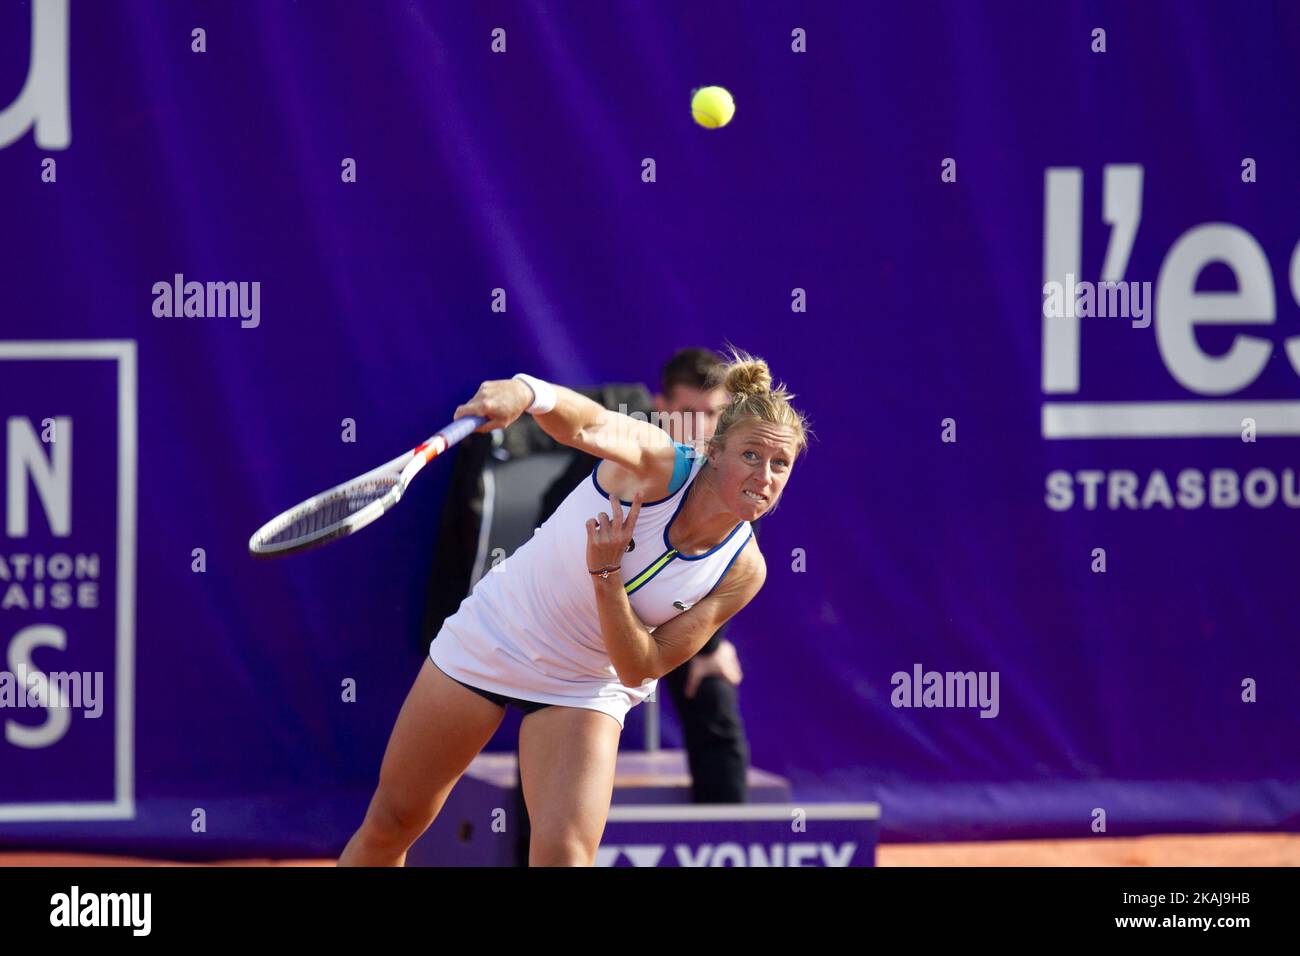 France's Pauline Parmentier in action against Mirjana LUCIC-BARONI during  their match on May 19, 2016, in Strasbourg, France, at the Strasbourg  International. First major event of the French women's tennis on clay